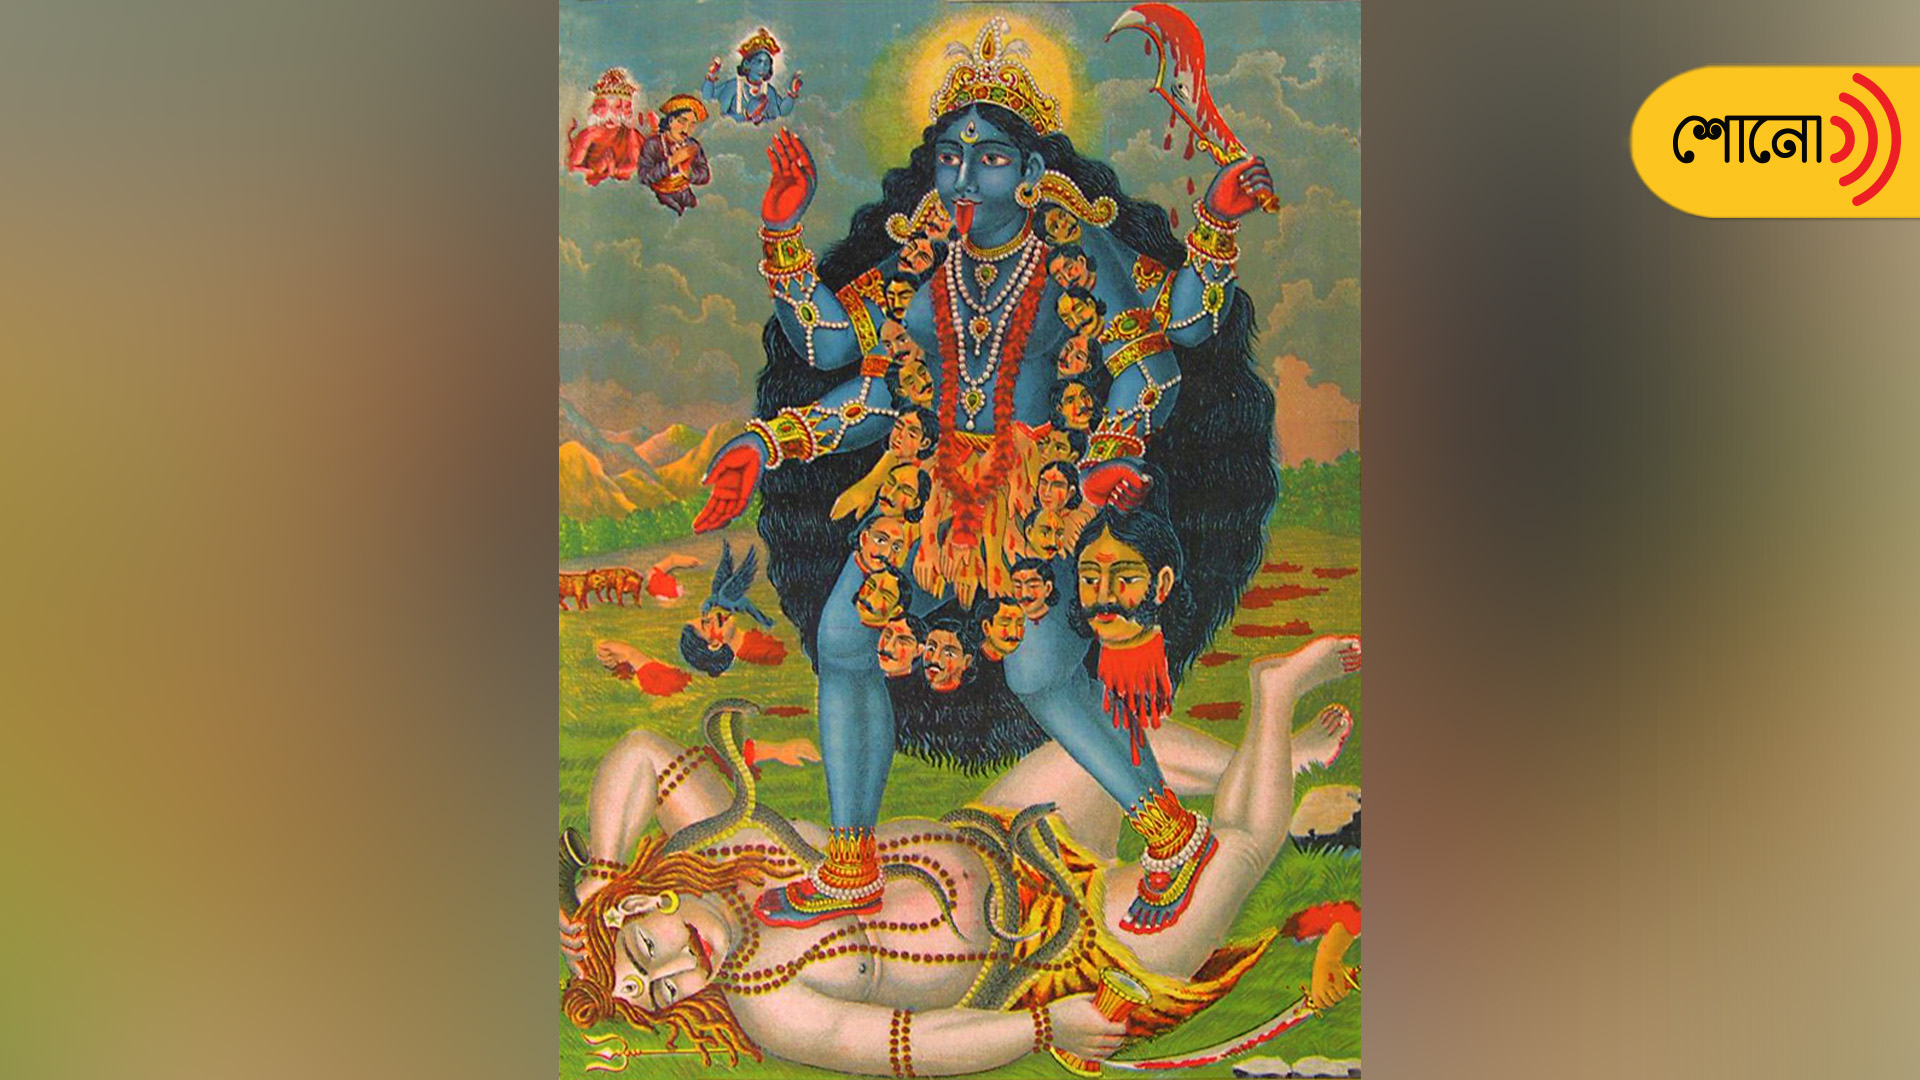 know more about devi kali and the signifinace of Mahadev on the idol